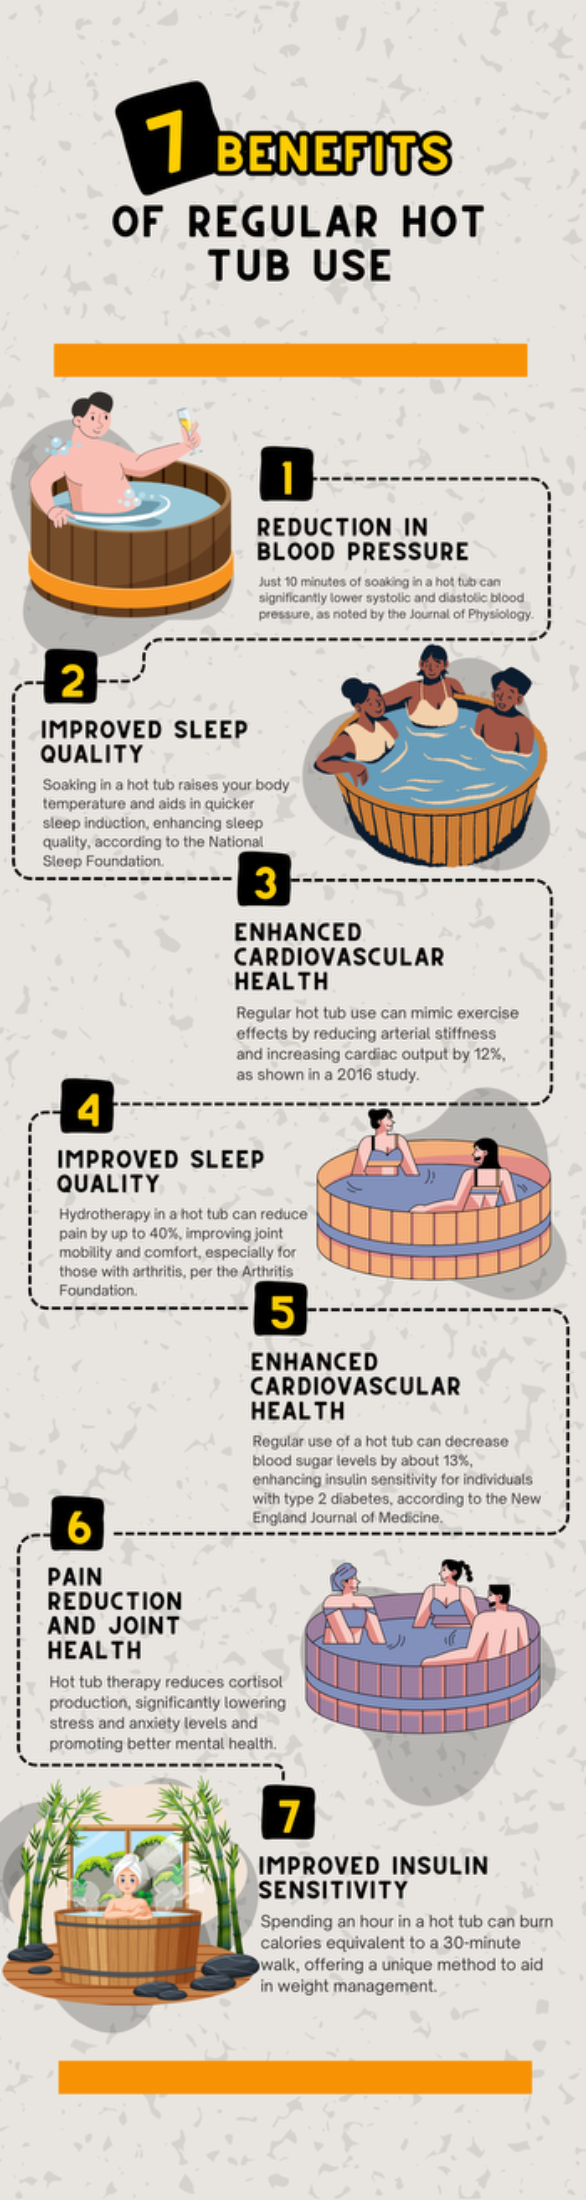 Infographic illustrating the health benefits of regular hot tub use, ideal for owners of Regina homes for sale with a hot tub. Highlights include reductions in blood pressure, improved sleep quality, enhanced cardiovascular health, pain relief, better insulin sensitivity, decreased stress, and calorie burning.